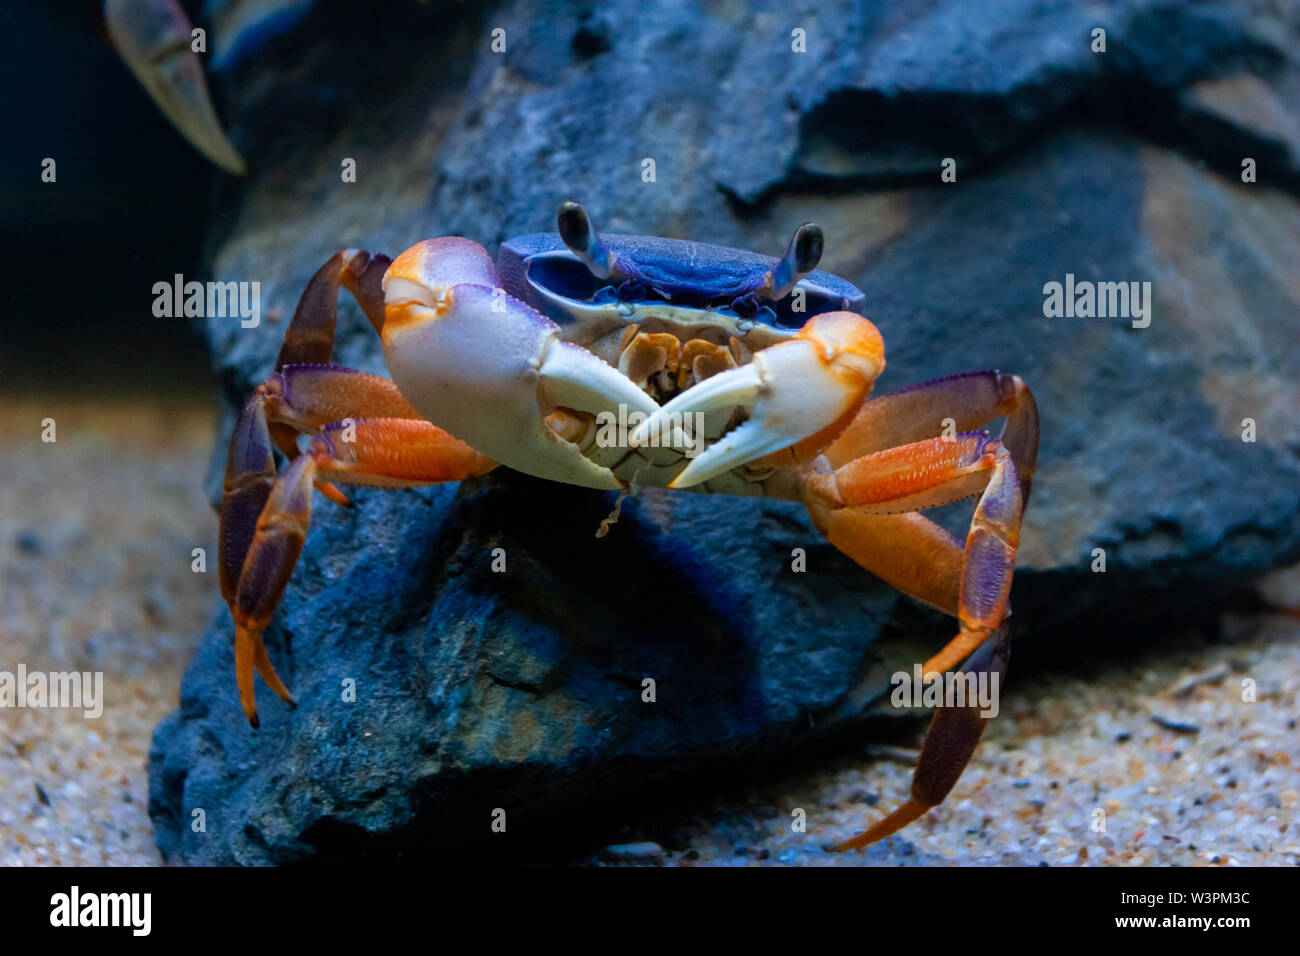 Underwater closeup picture of the  mangrove ( rainbow ) crab in the ocean coral reef. Stock Photo